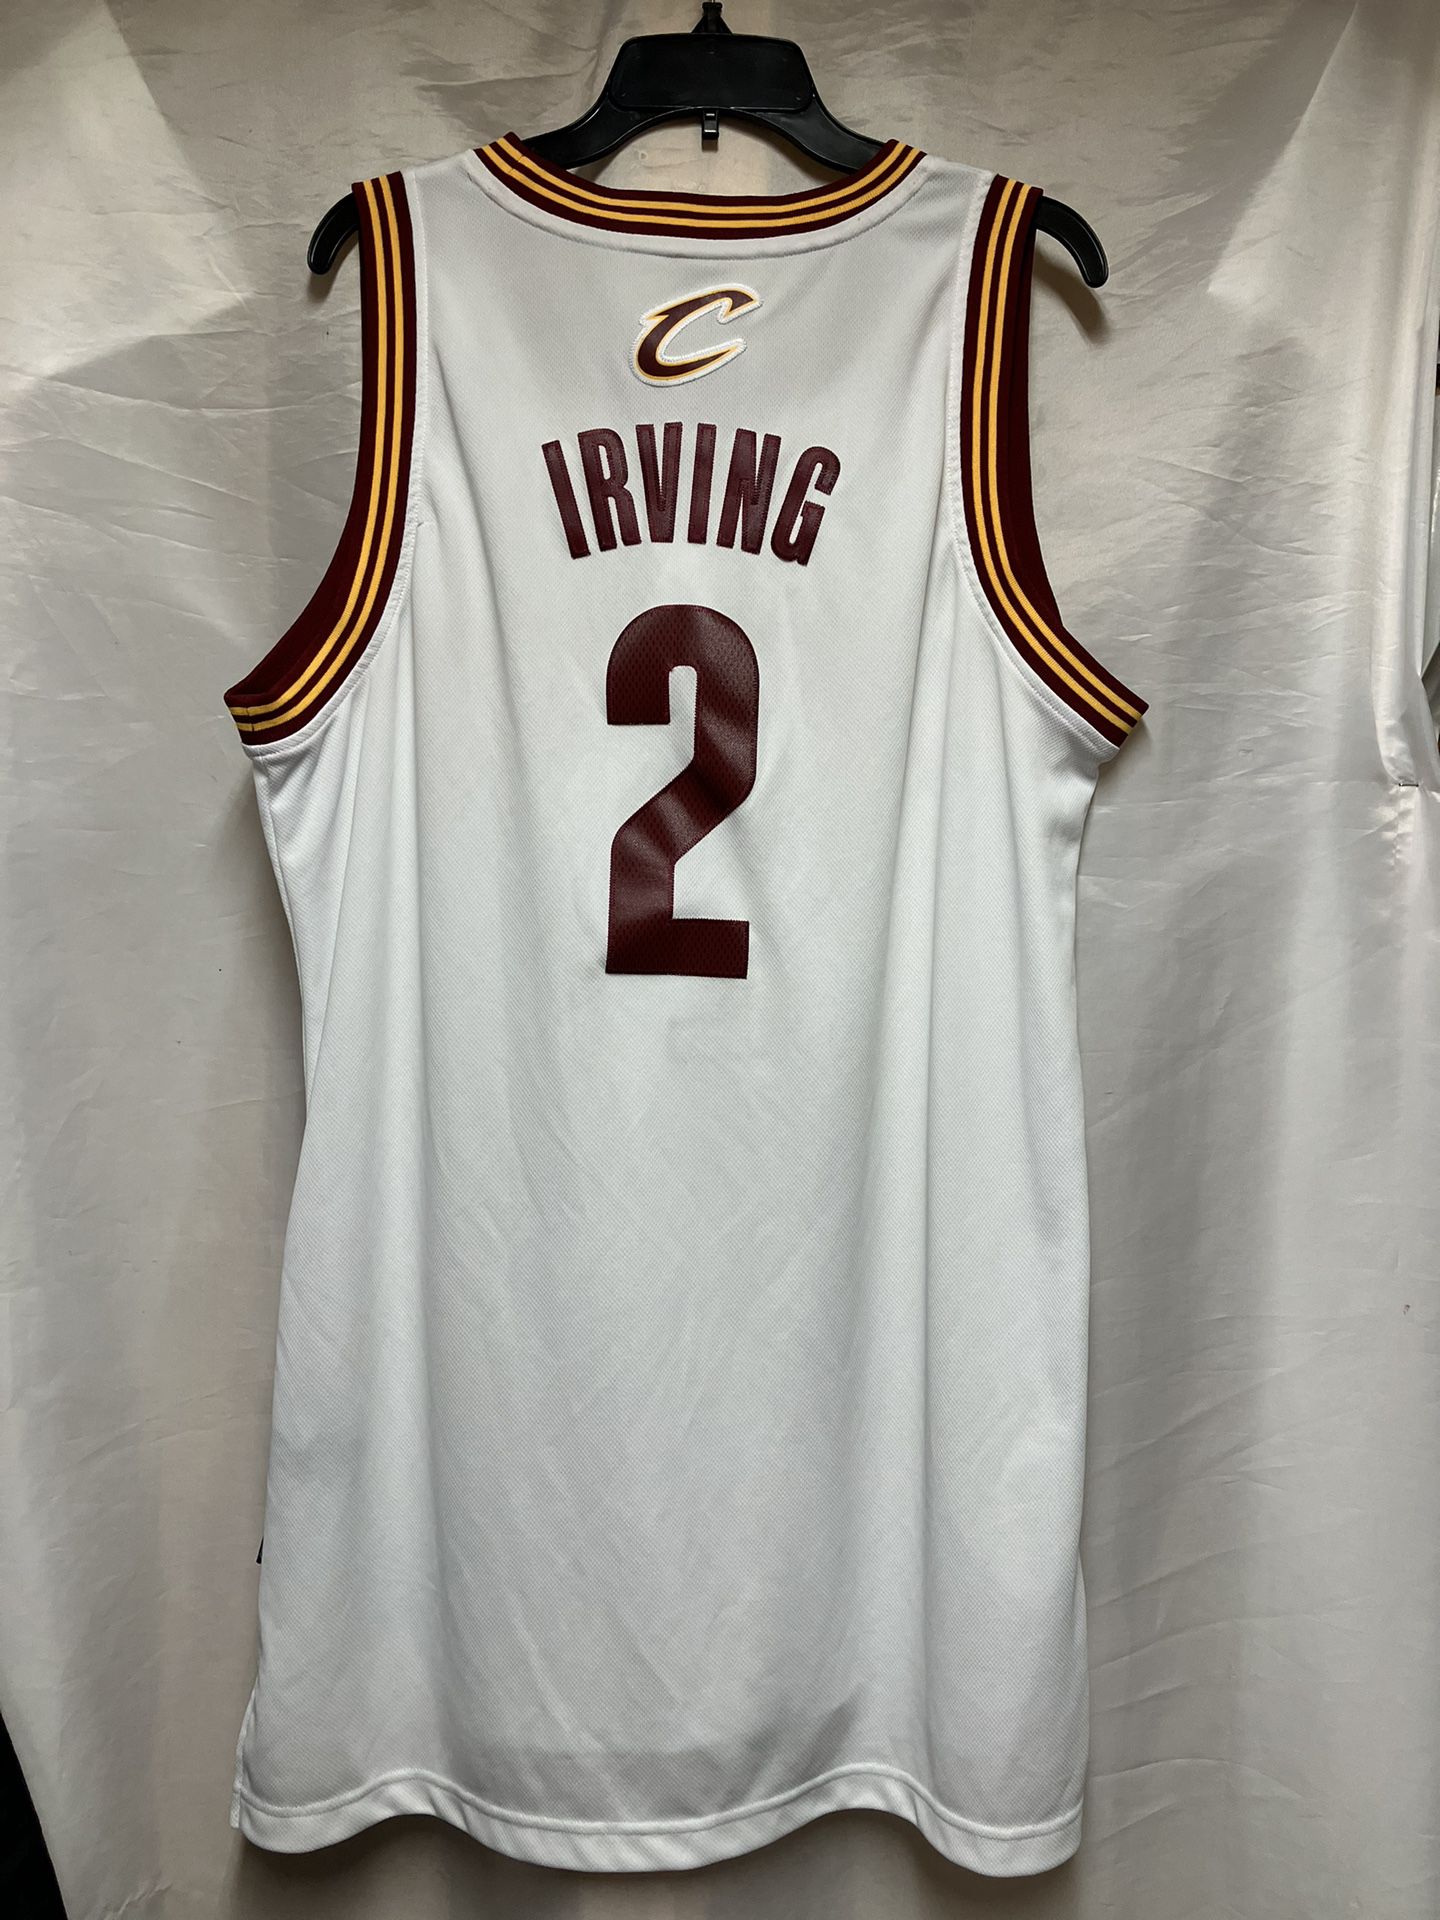 kyrie irving black adidas jersey, Off 72%